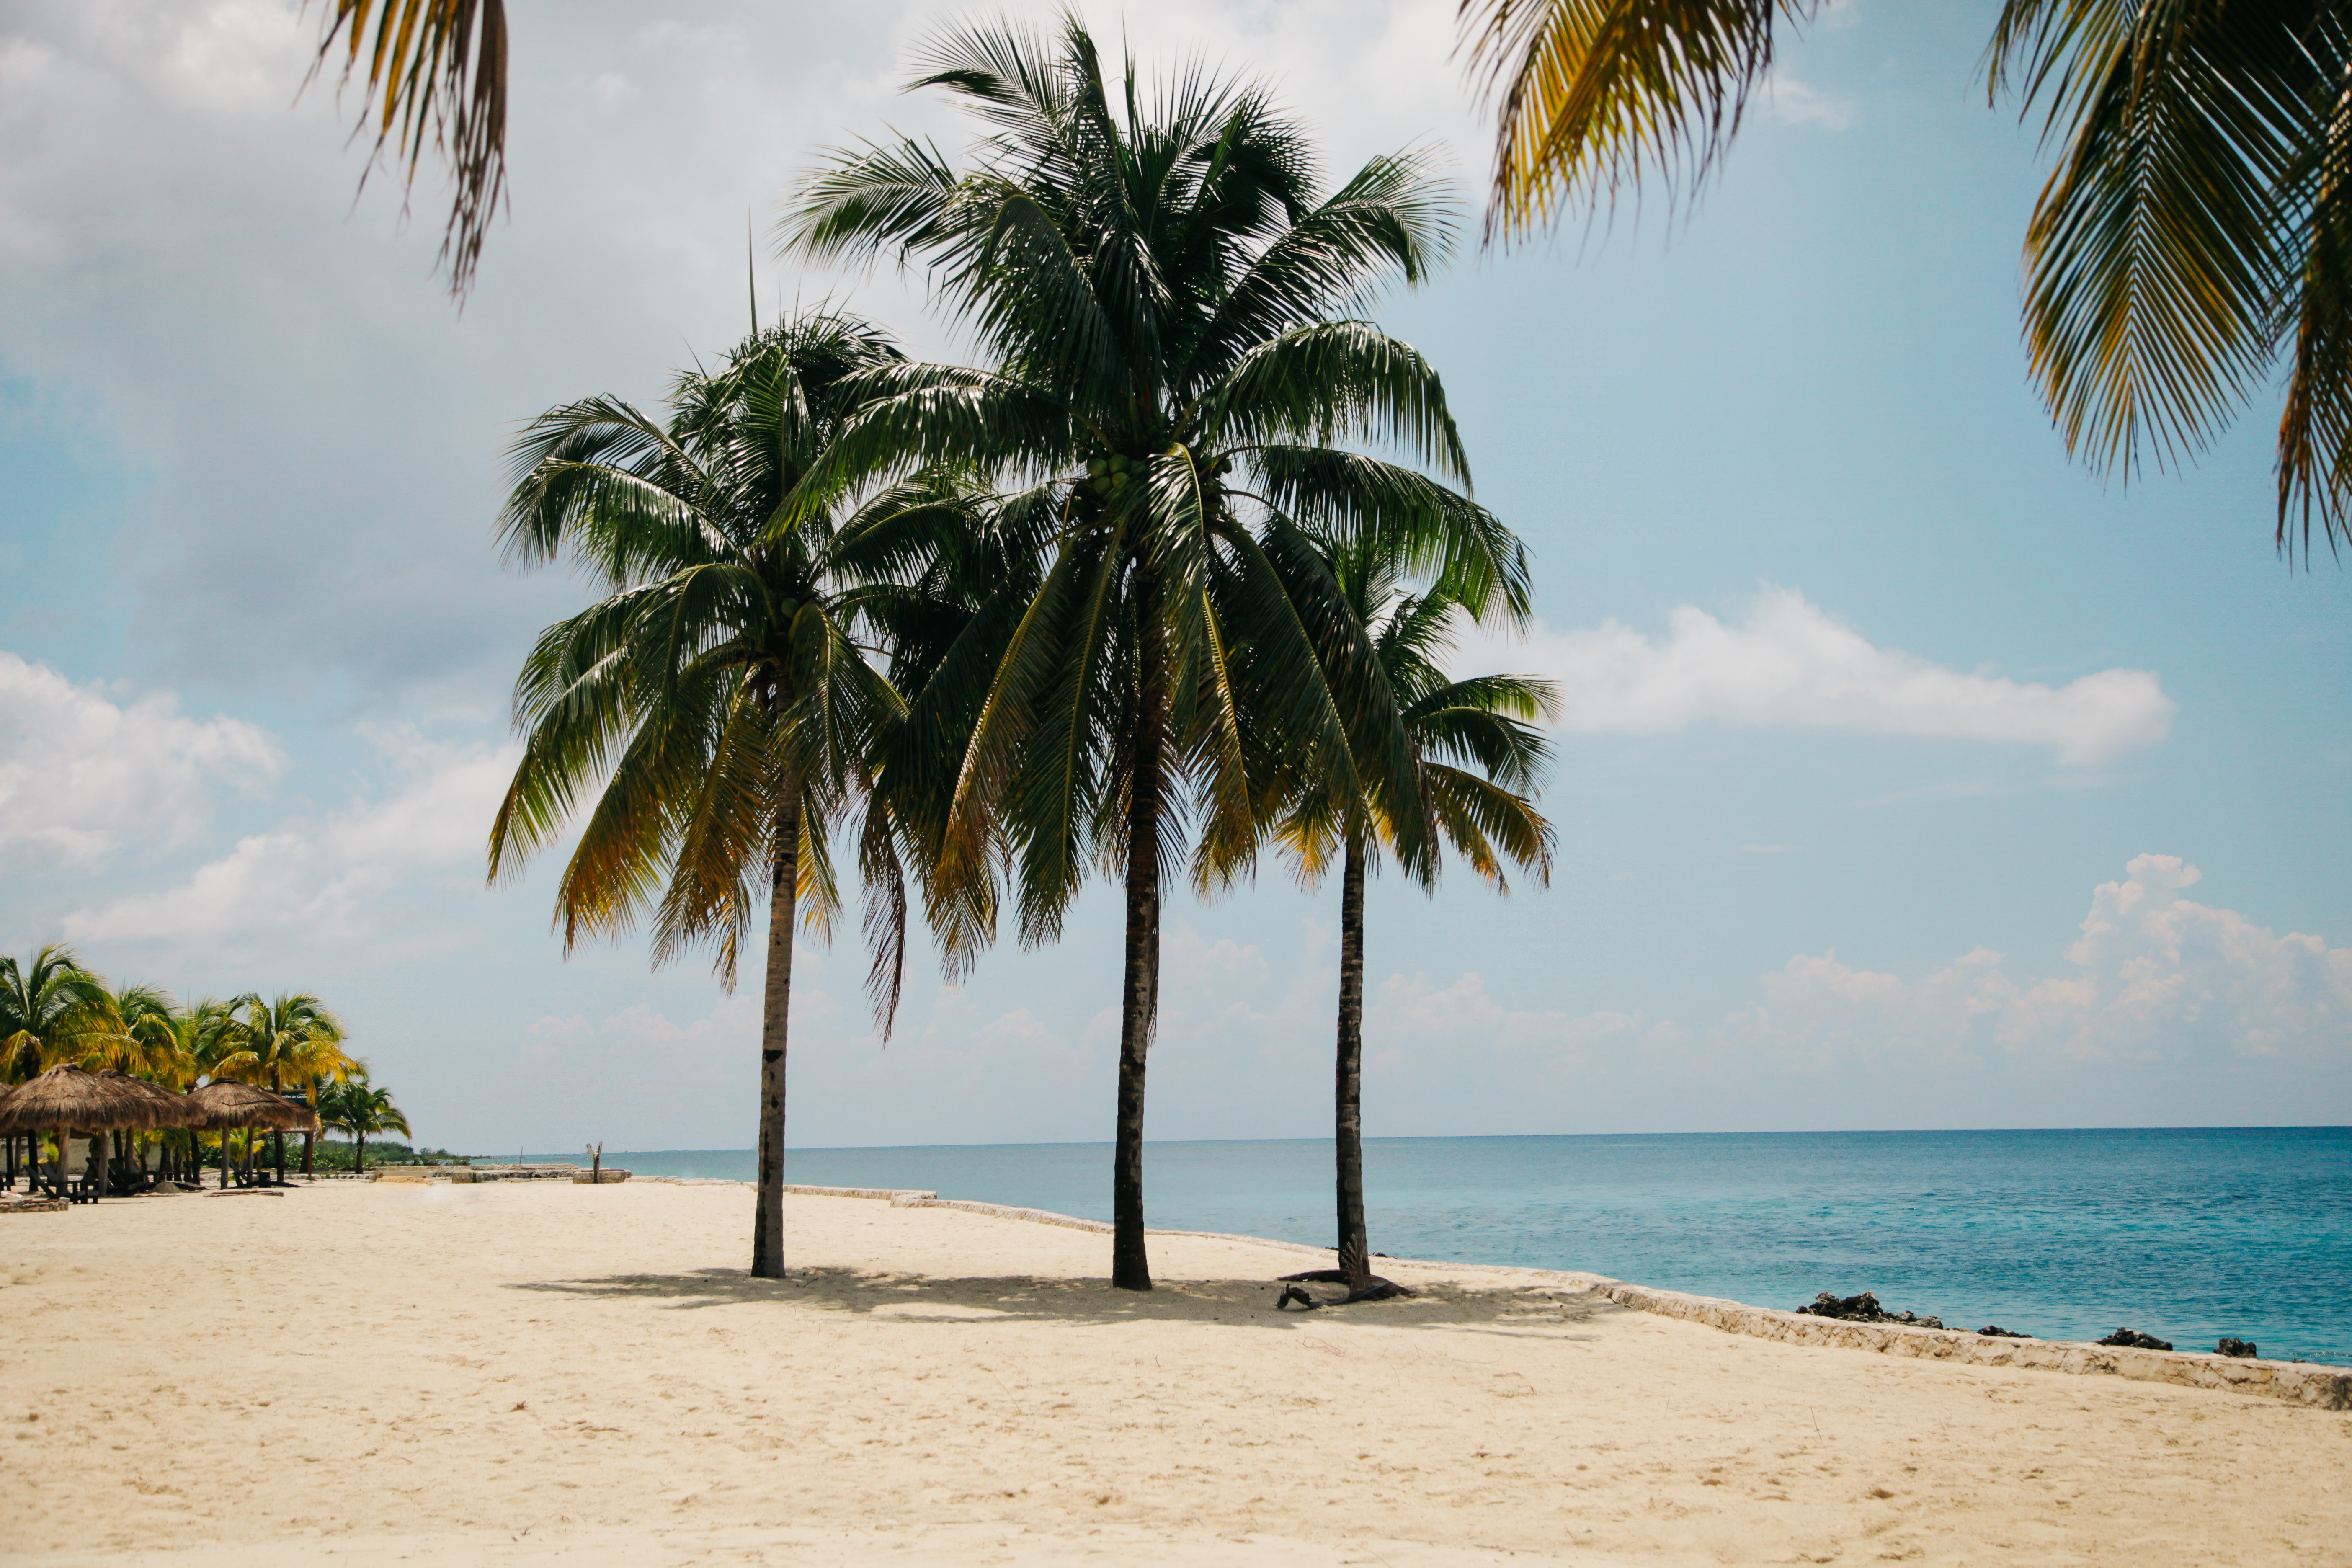 Coconut Tree on the Beach during Daytime, Bay, Seascape, Vacation, Tropical, HQ Photo